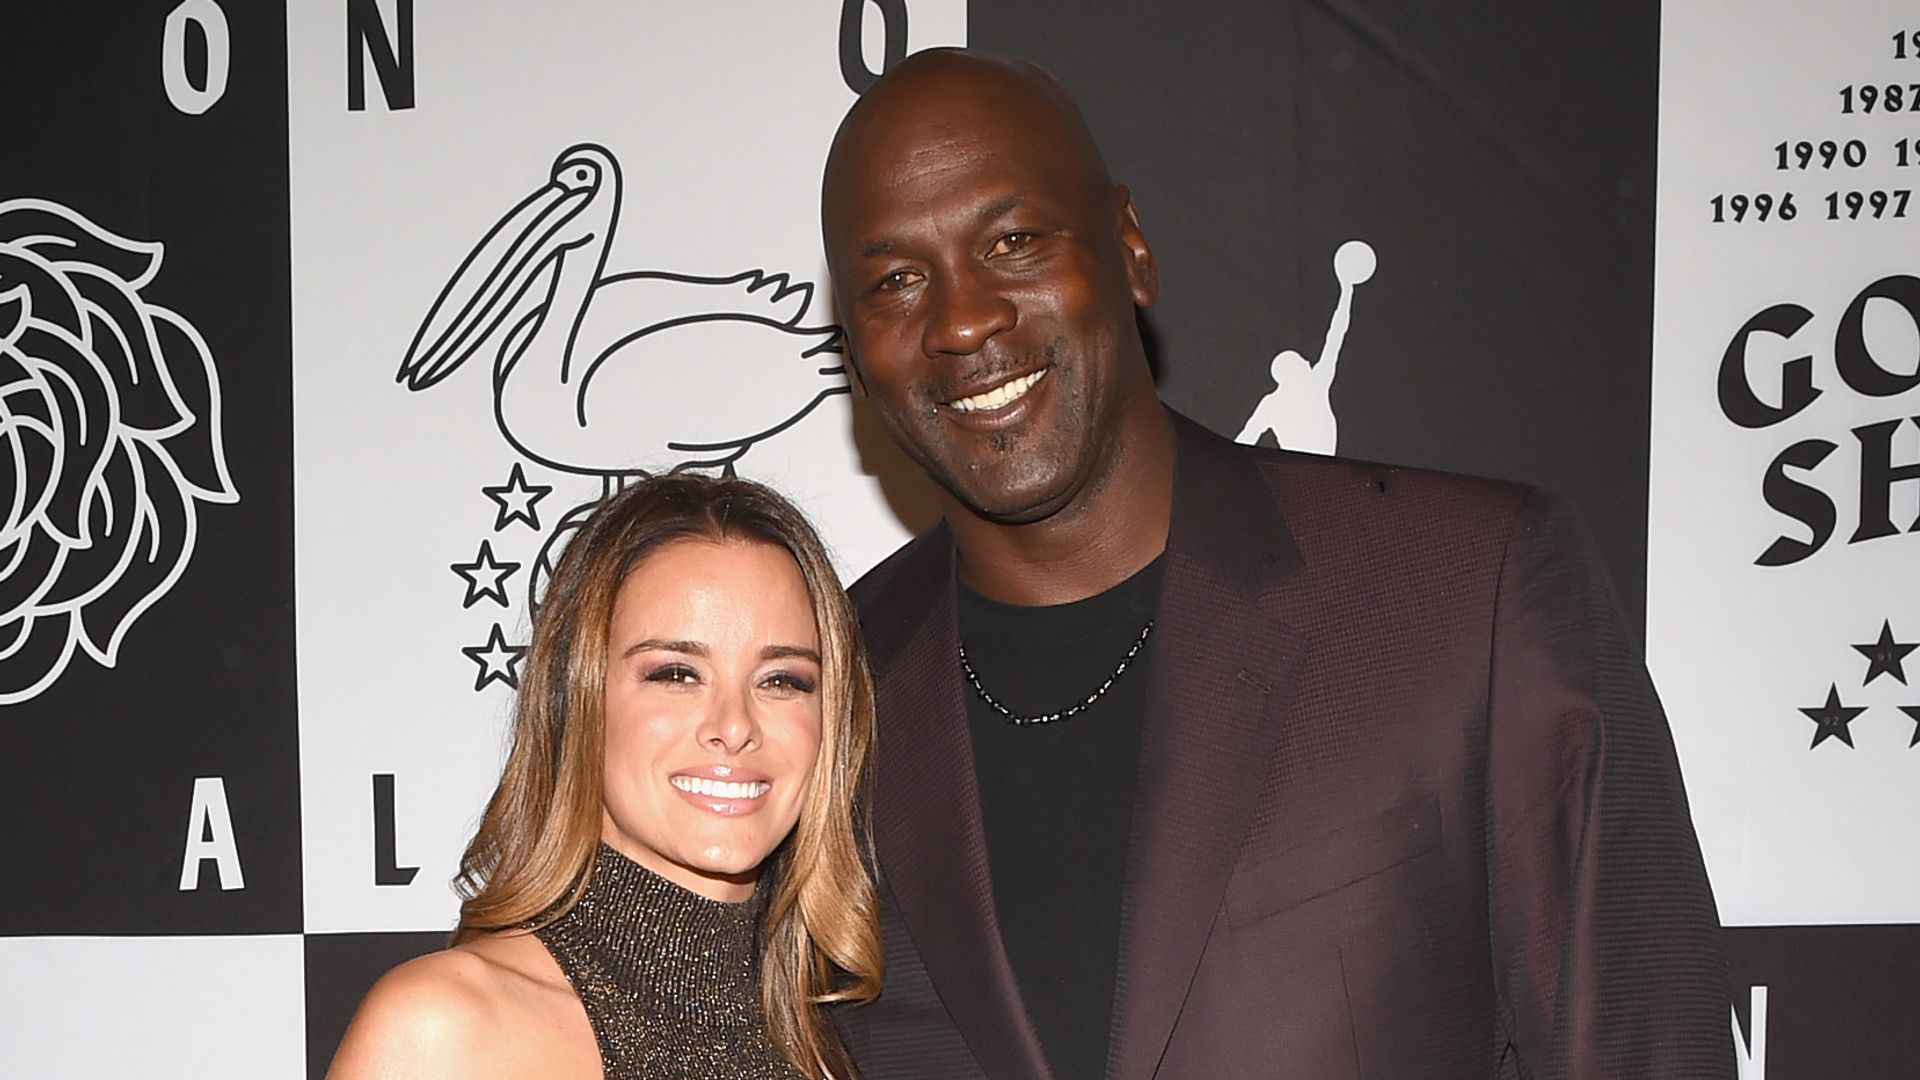 Michael Jordan and Yvette Prieto enjoy Italy with their twins in rare outing